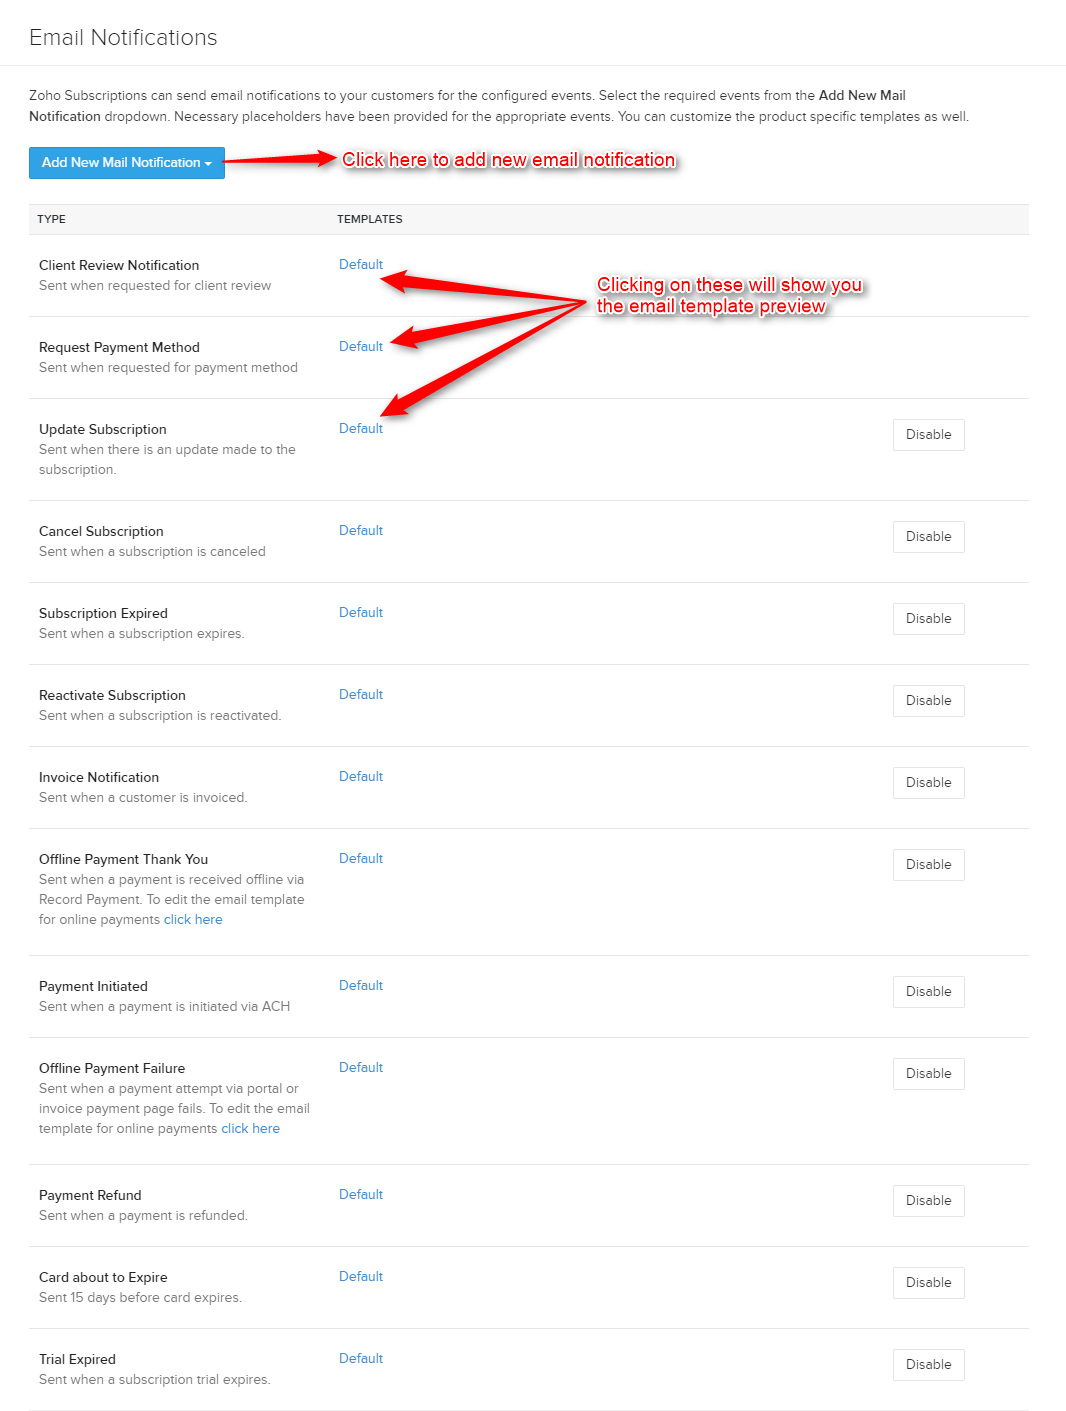 settings-email-notifications